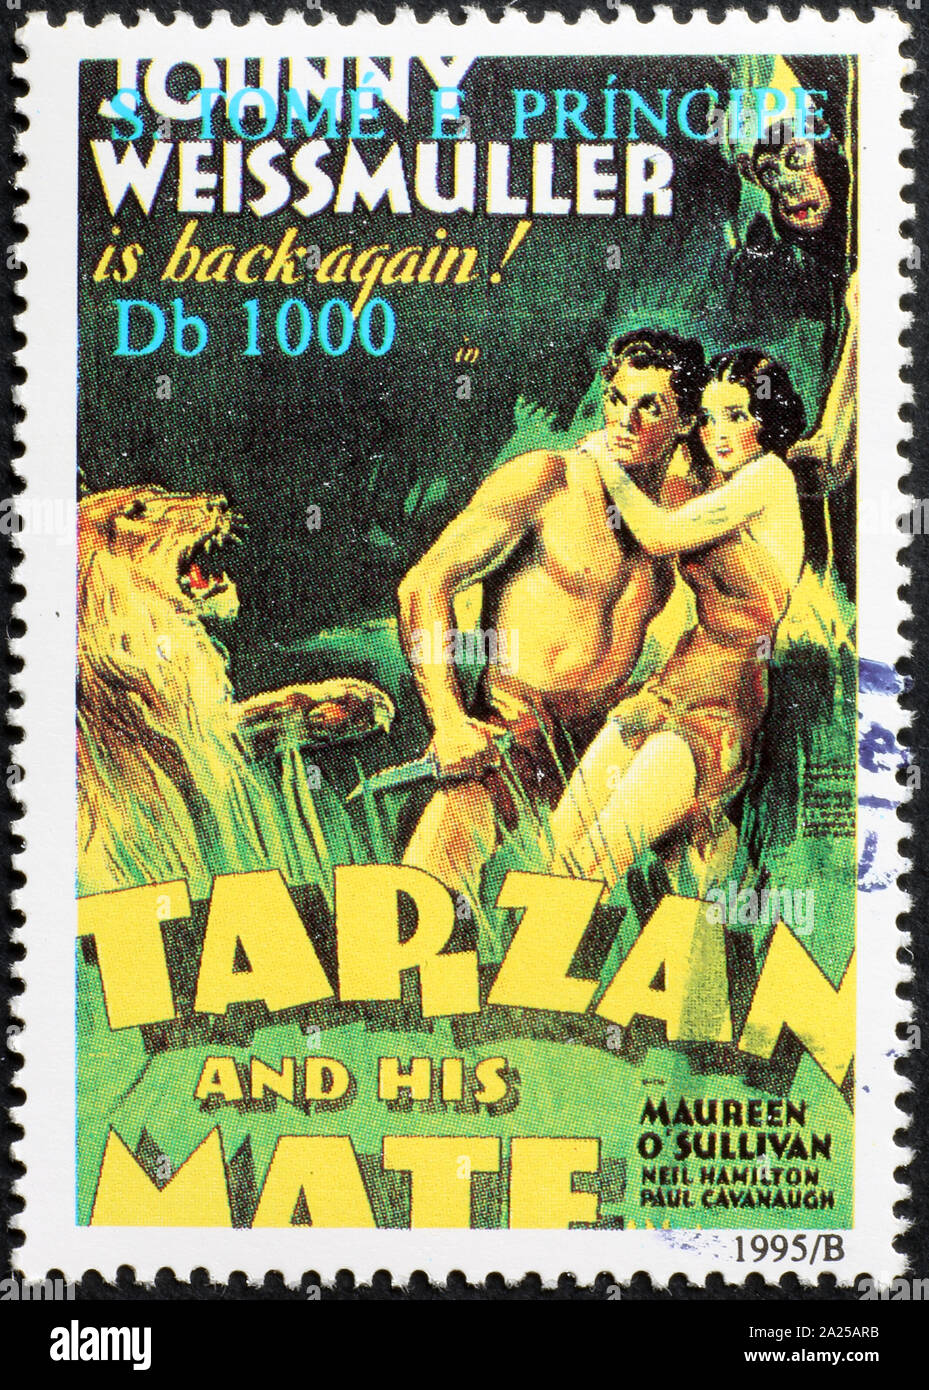 Poster of Johnny Weissmuller as Tarzan on postage stamp Stock Photo